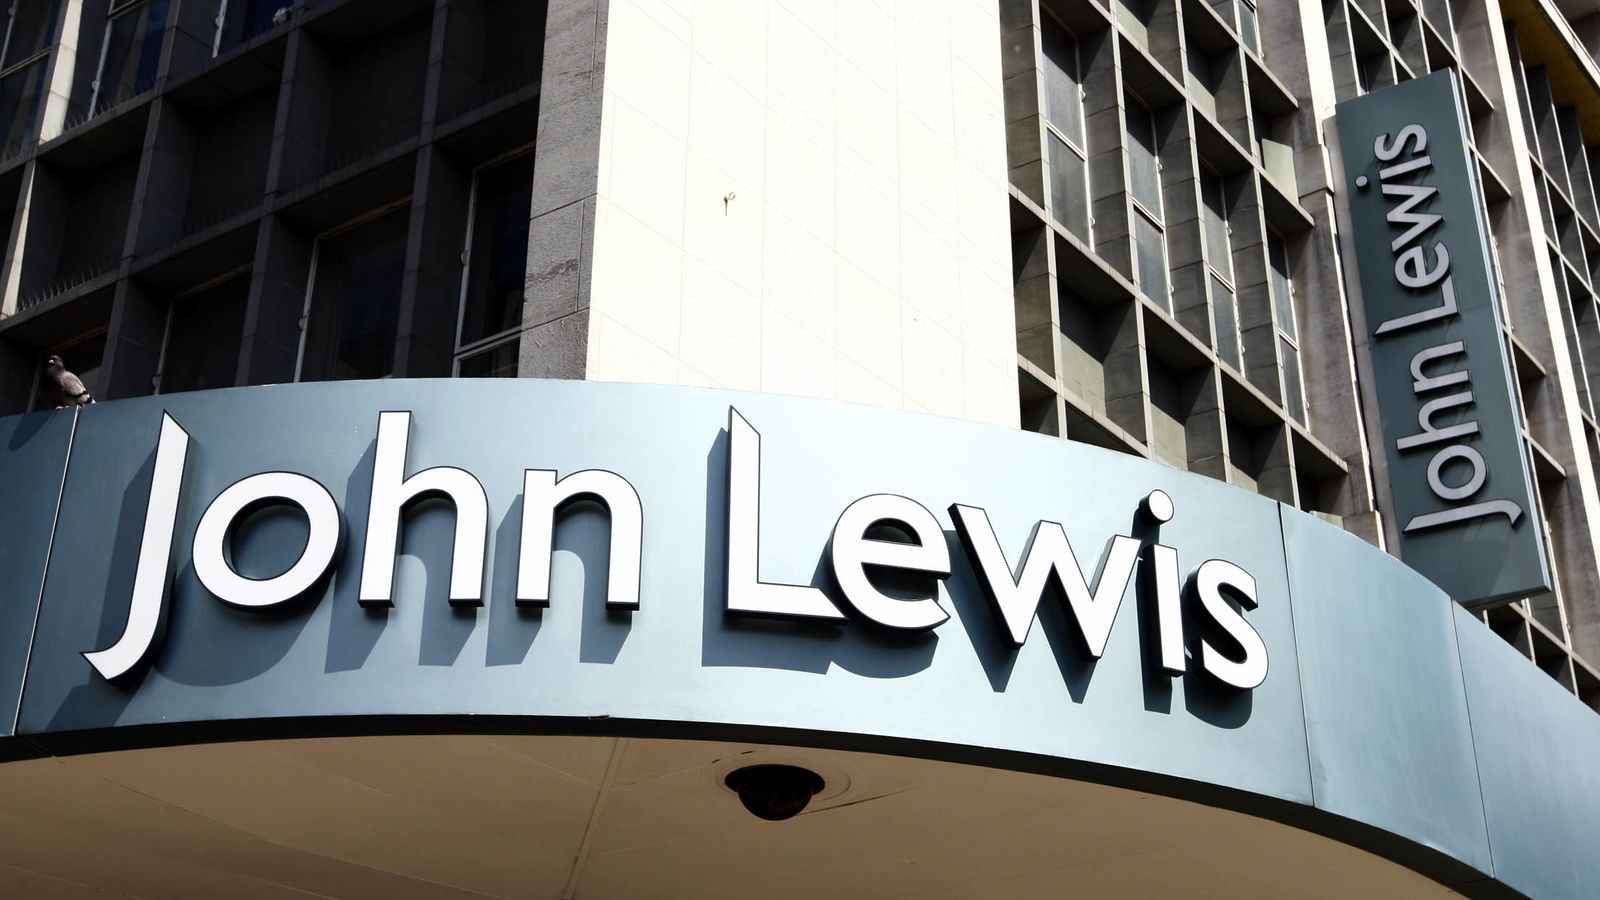 John Lewis may end 100% staff ownership to raise investment for 'transformation' as job losses loom